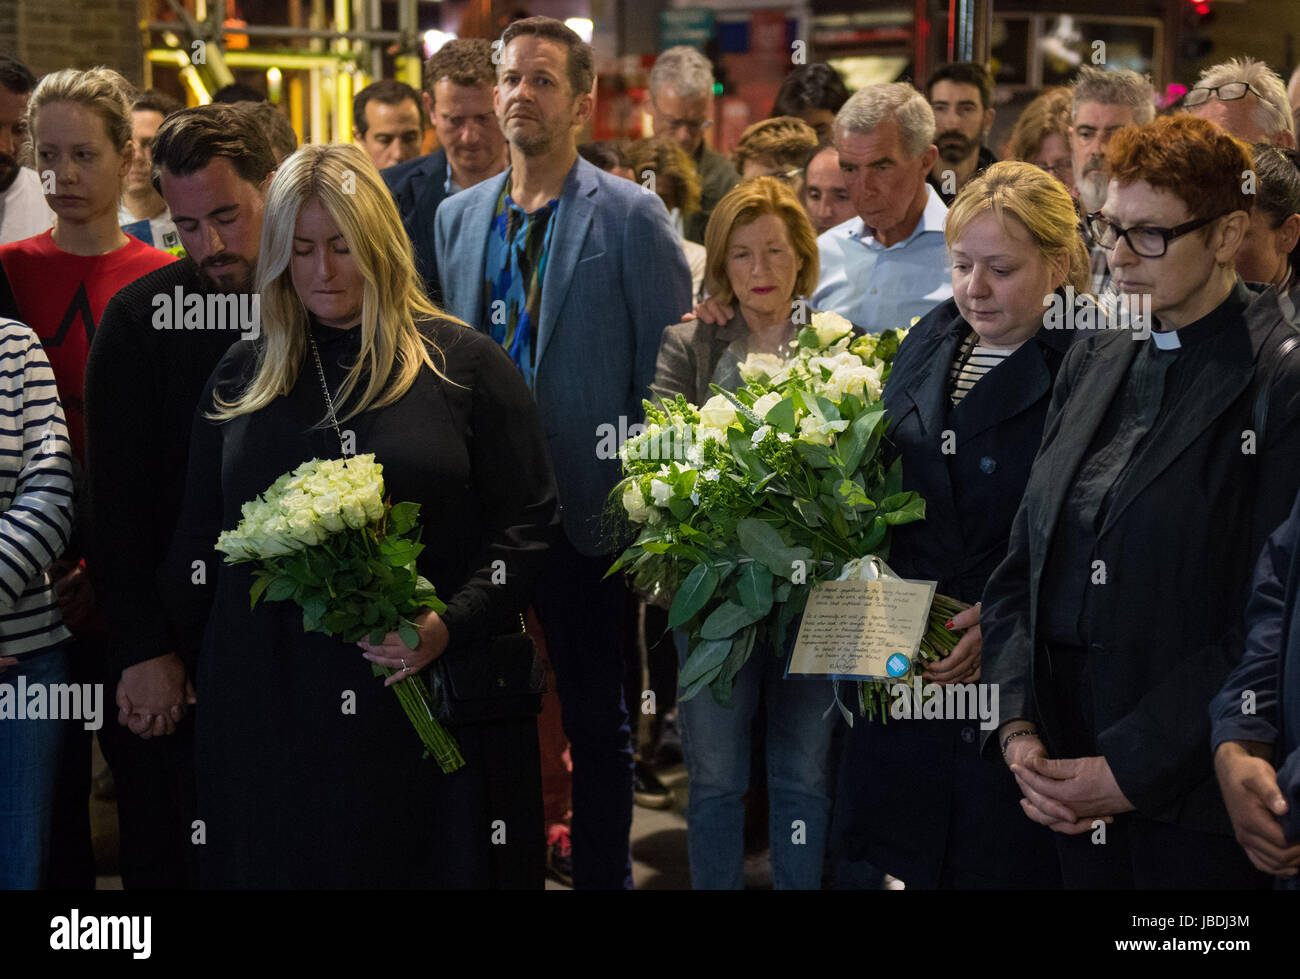 Staff and traders from Borough Market observe a minute's silence before laying flowers outside the market one week after the terrorist attack on London Bridge and Borough Market. Stock Photo